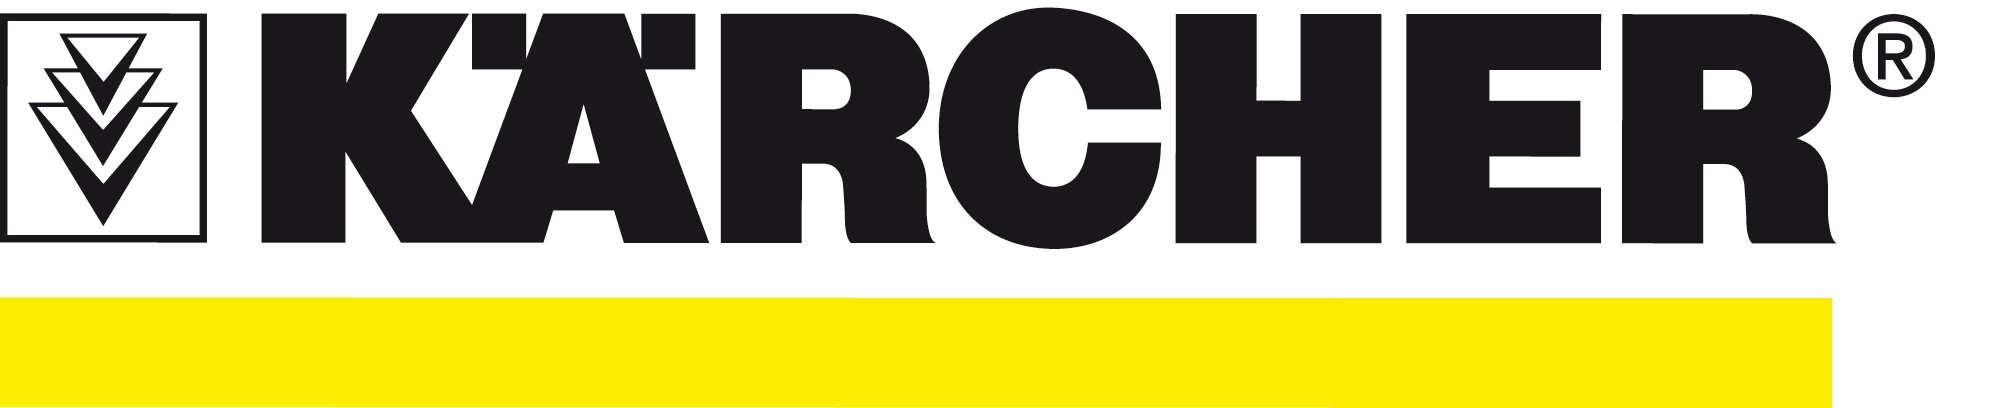 Karcher - the professional hoover